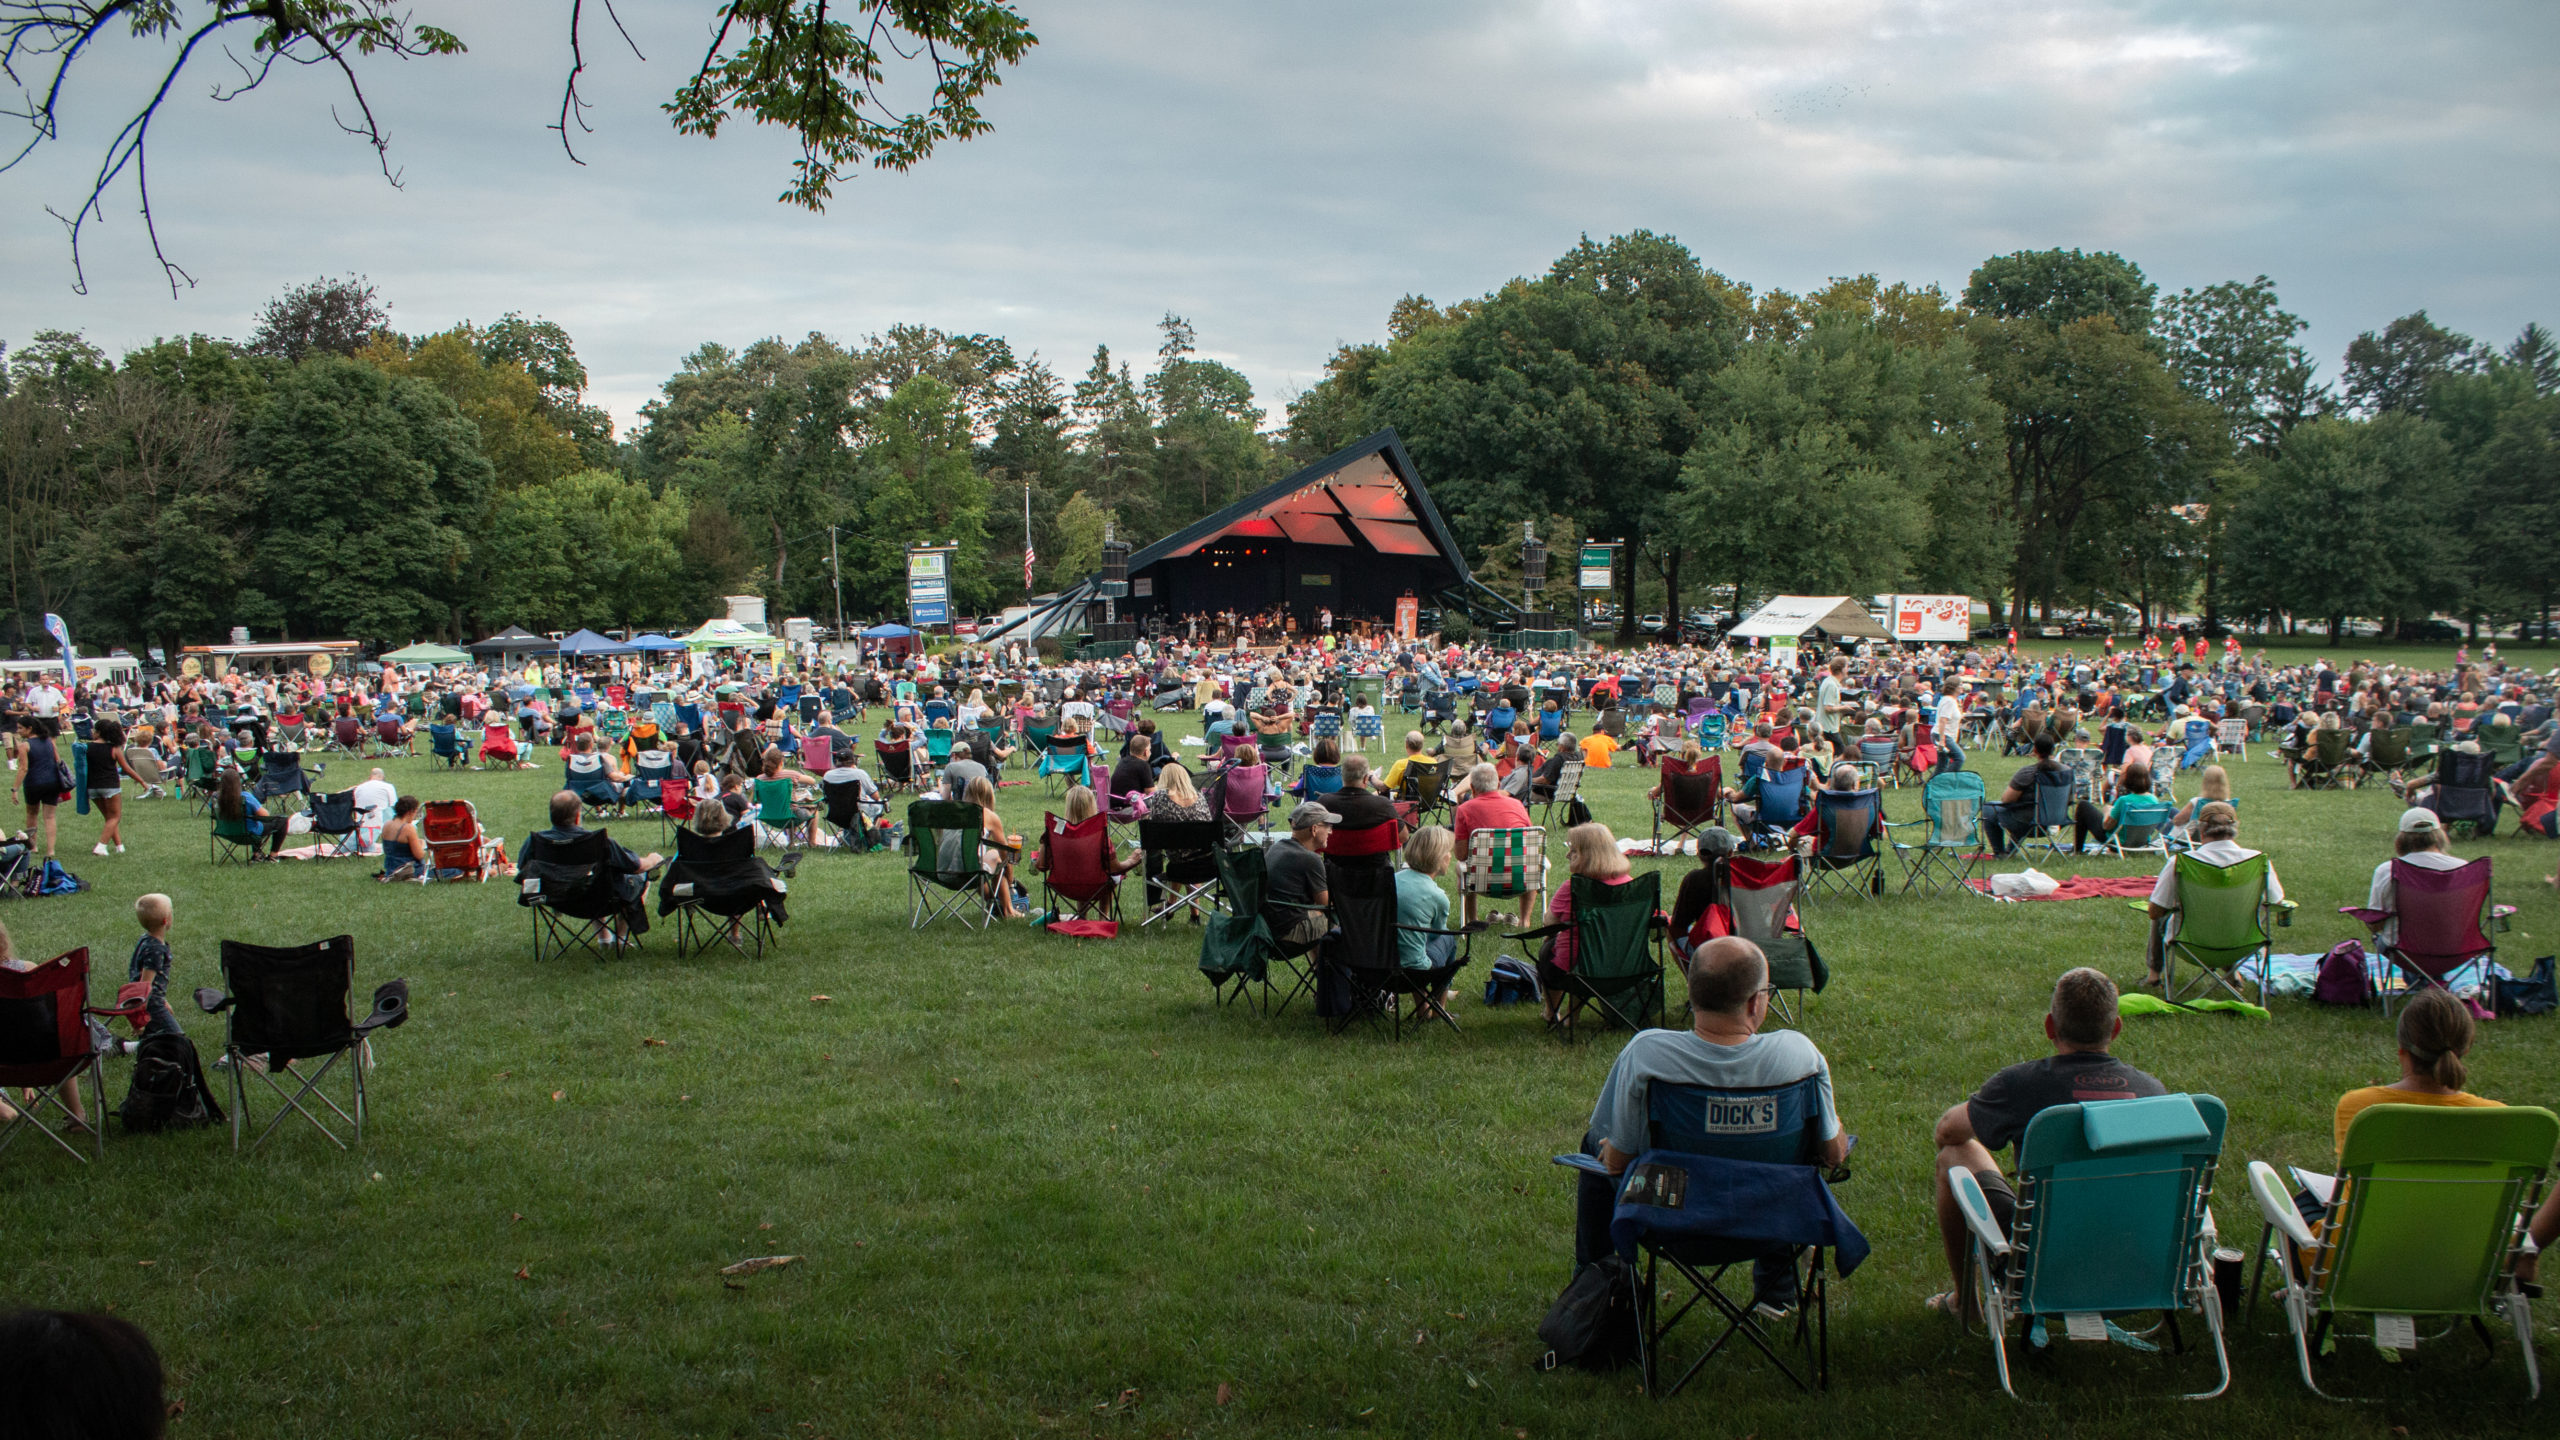 Kalas Foundation Supports Long's Park Ampitheater Foundation Live aid Concert Aug. 29, 2021 Photo by Jim Goudie